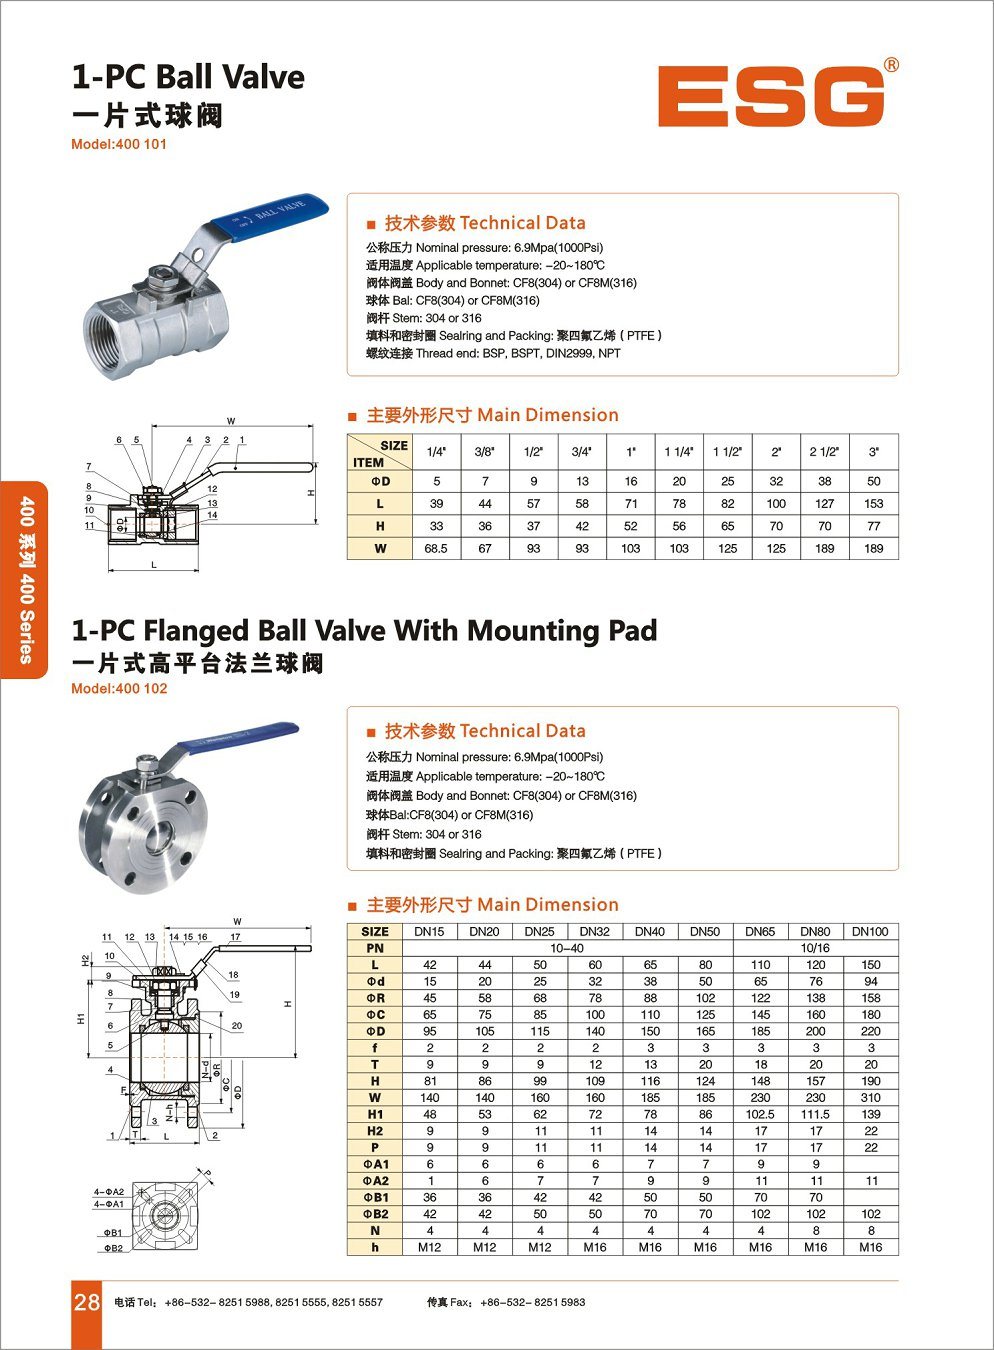 3-PC Stainless Steel Flanged Ball Valve